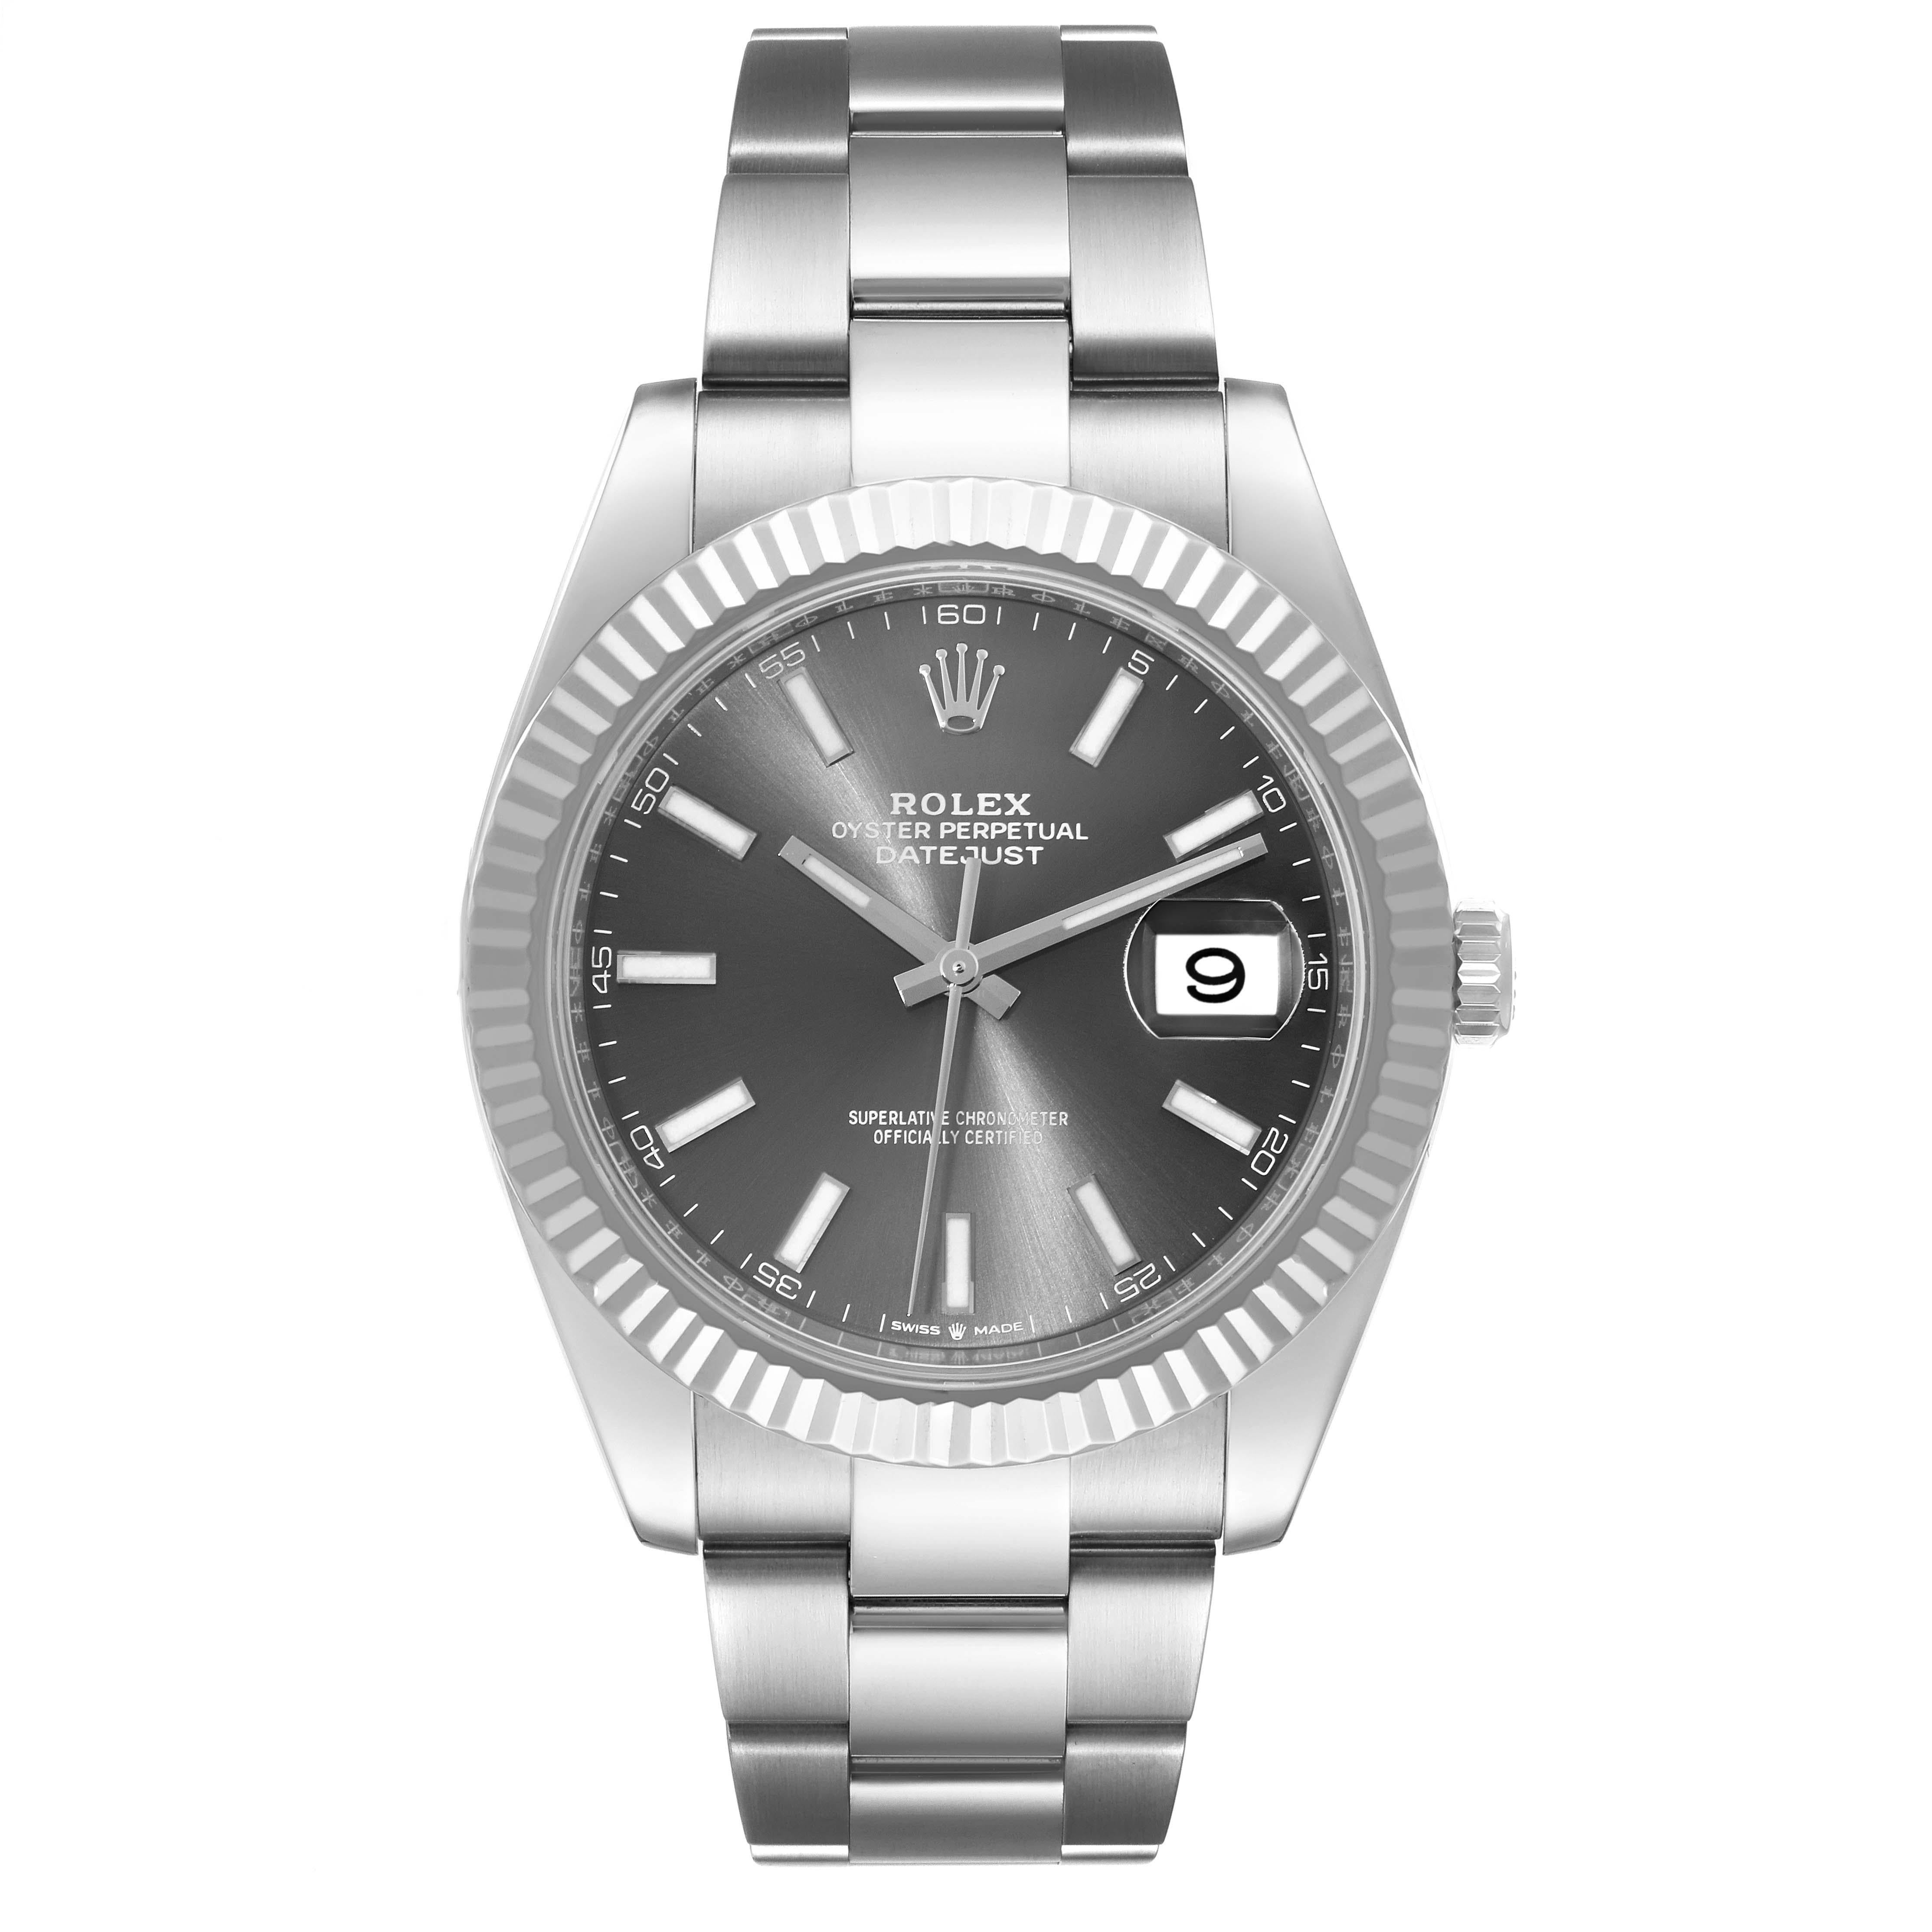 Rolex Datejust 41 Steel White Gold Slate Dial Mens Watch 126334 Box Card. Officially certified chronometer automatic self-winding movement. Stainless steel case 41 mm in diameter. Rolex logo on the crown. 18K white gold fluted bezel. Scratch